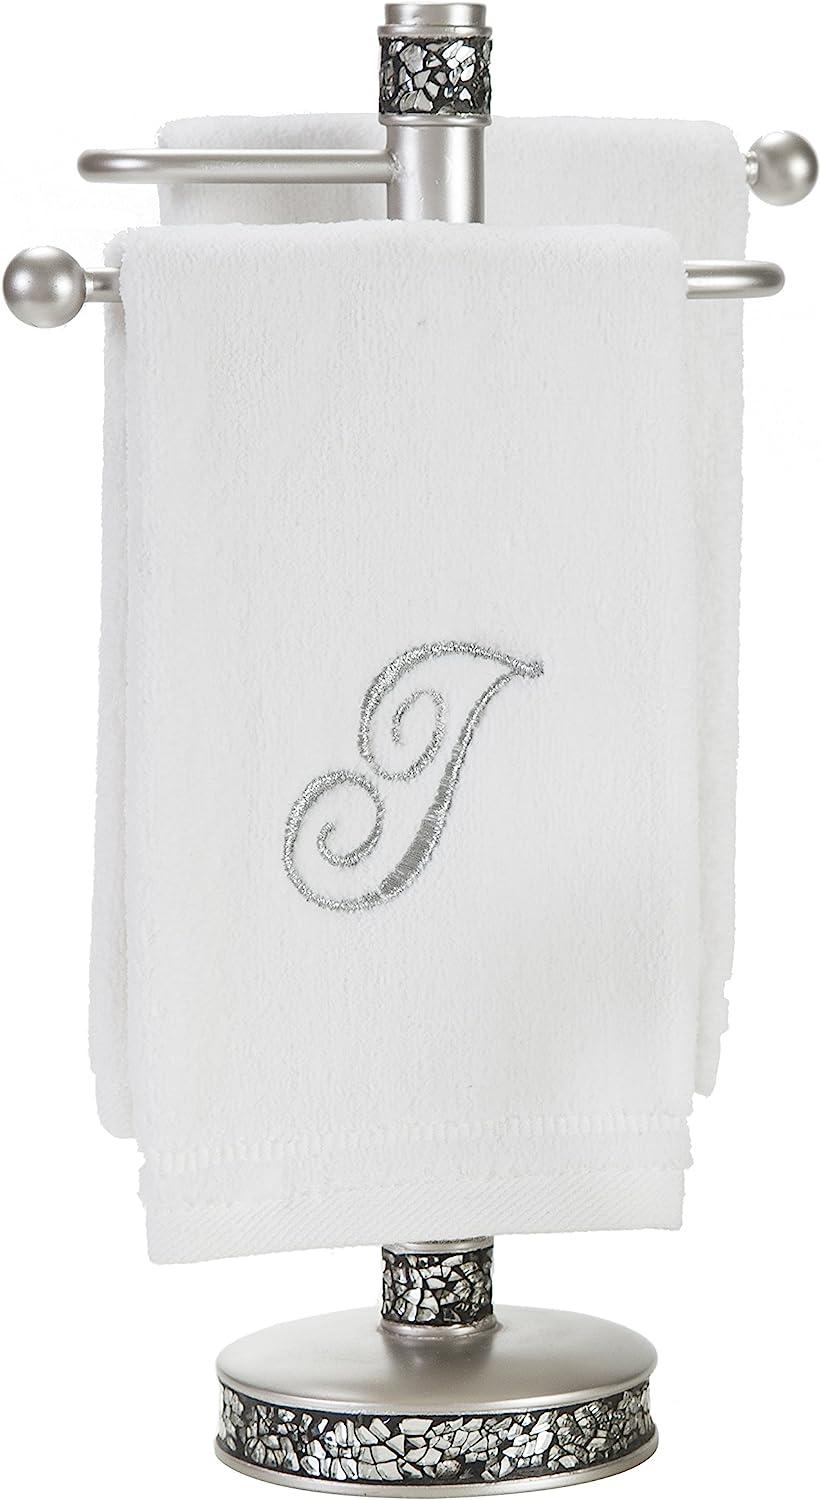 Monogrammed Towels Fingertip, Personalized Gift, 11 x 18 Inches